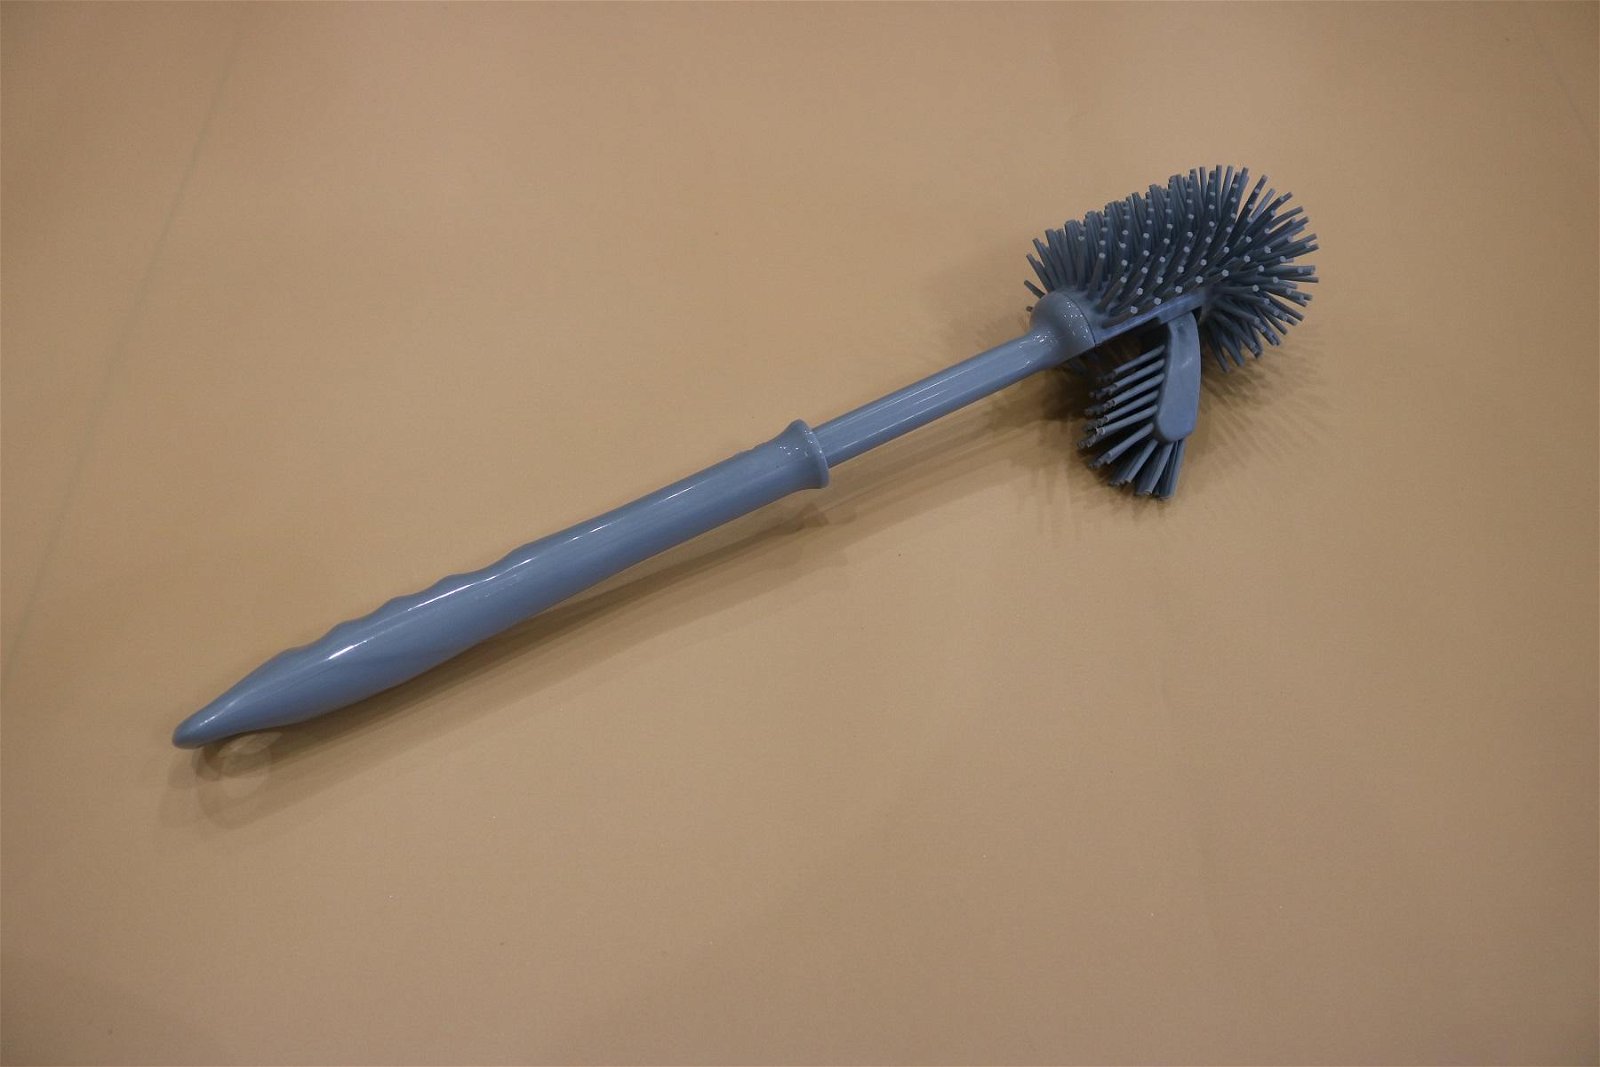 toilet cleaning brush